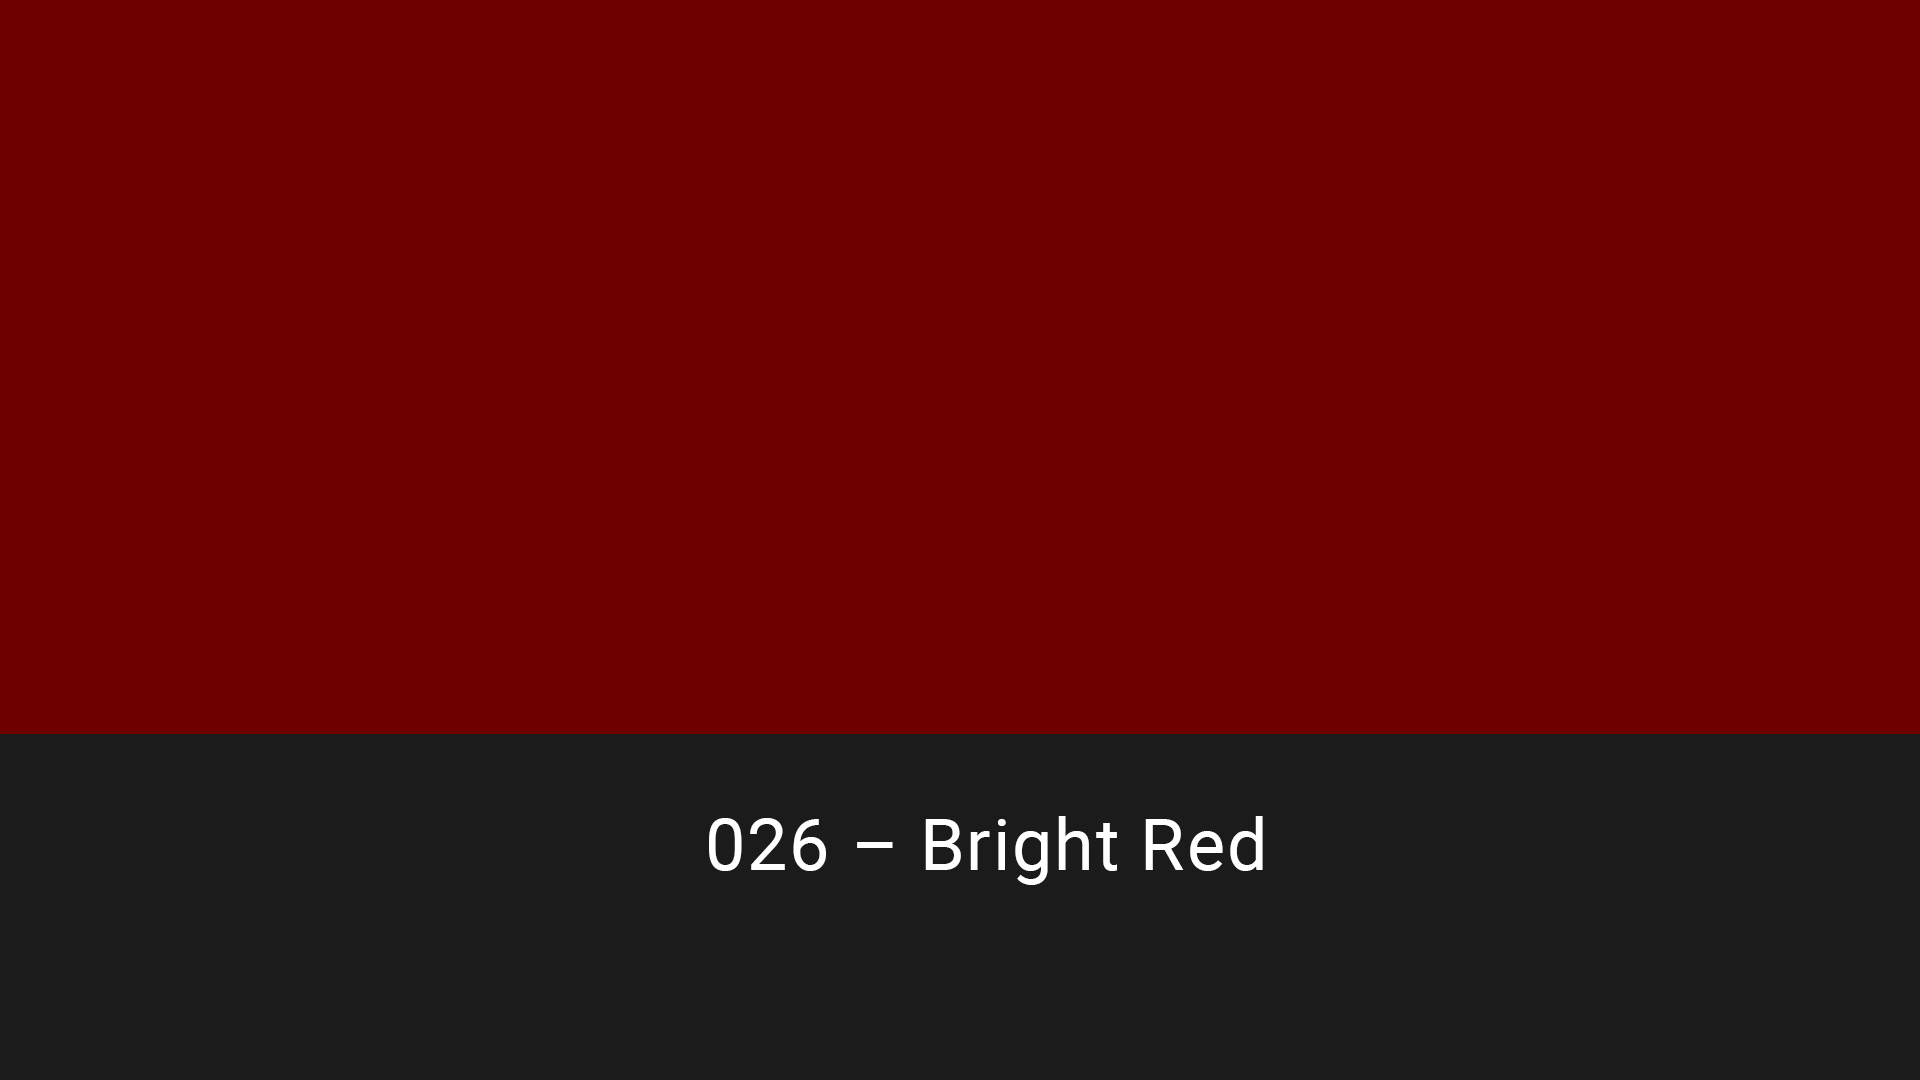 Cotech filters 026 Bright Red